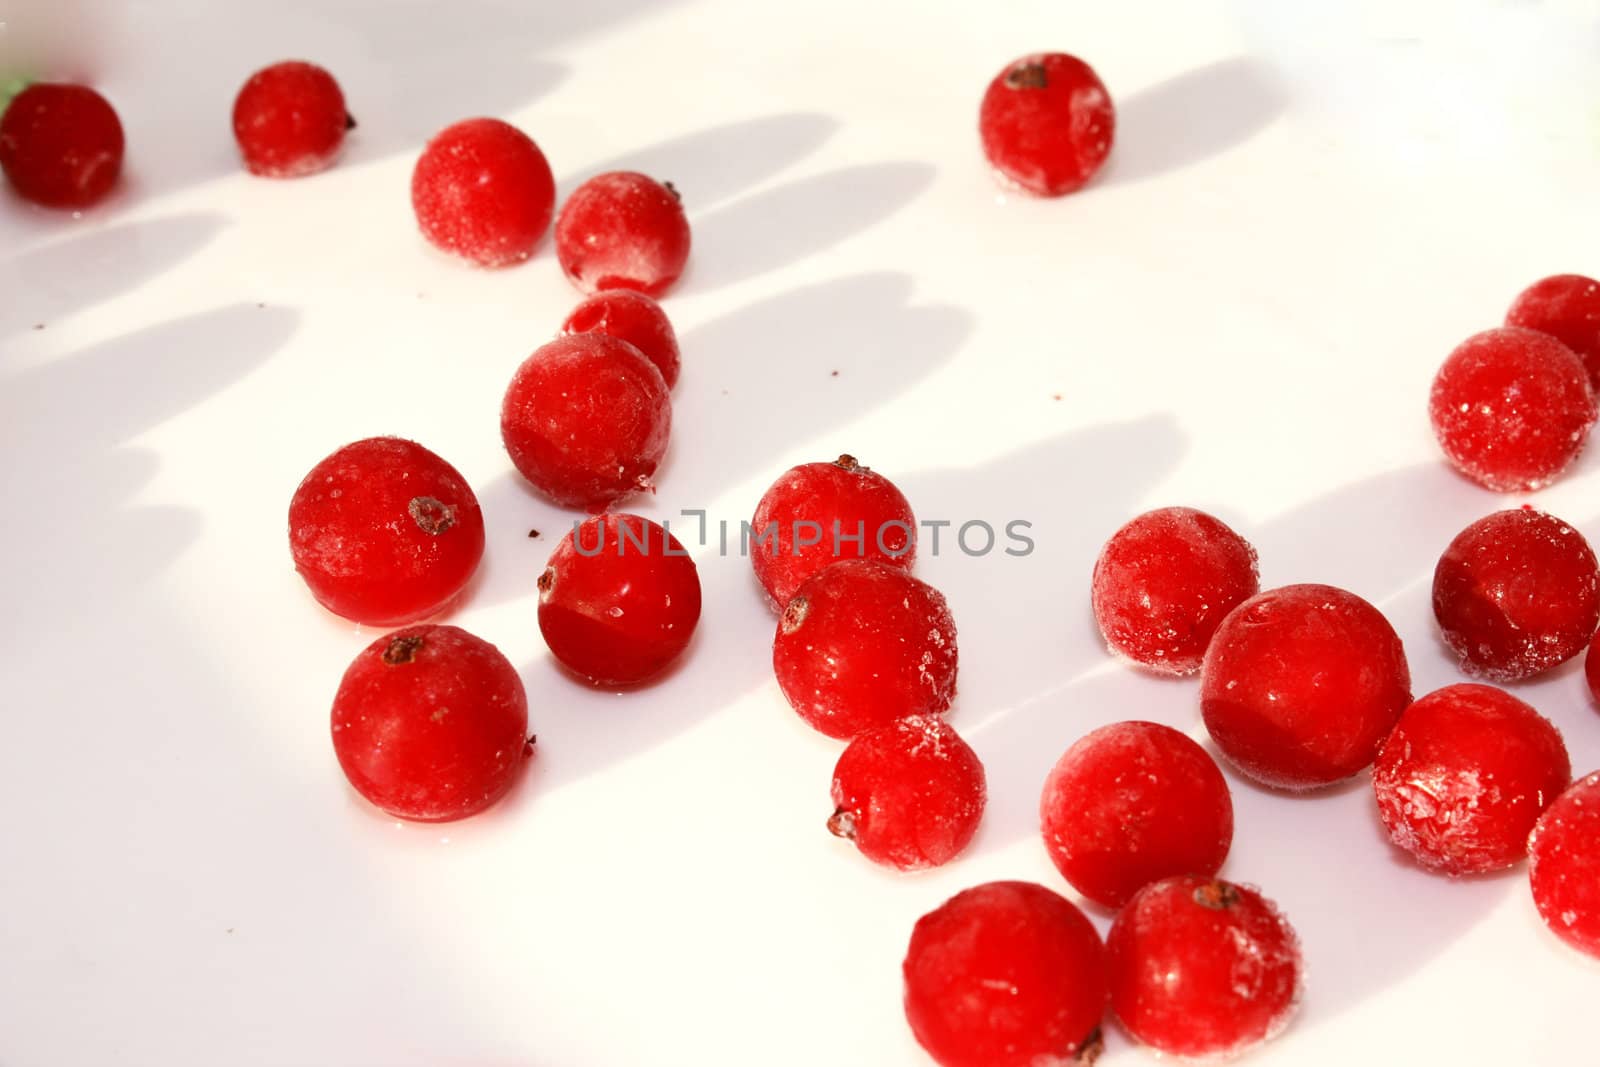 red currants by Lyudmila